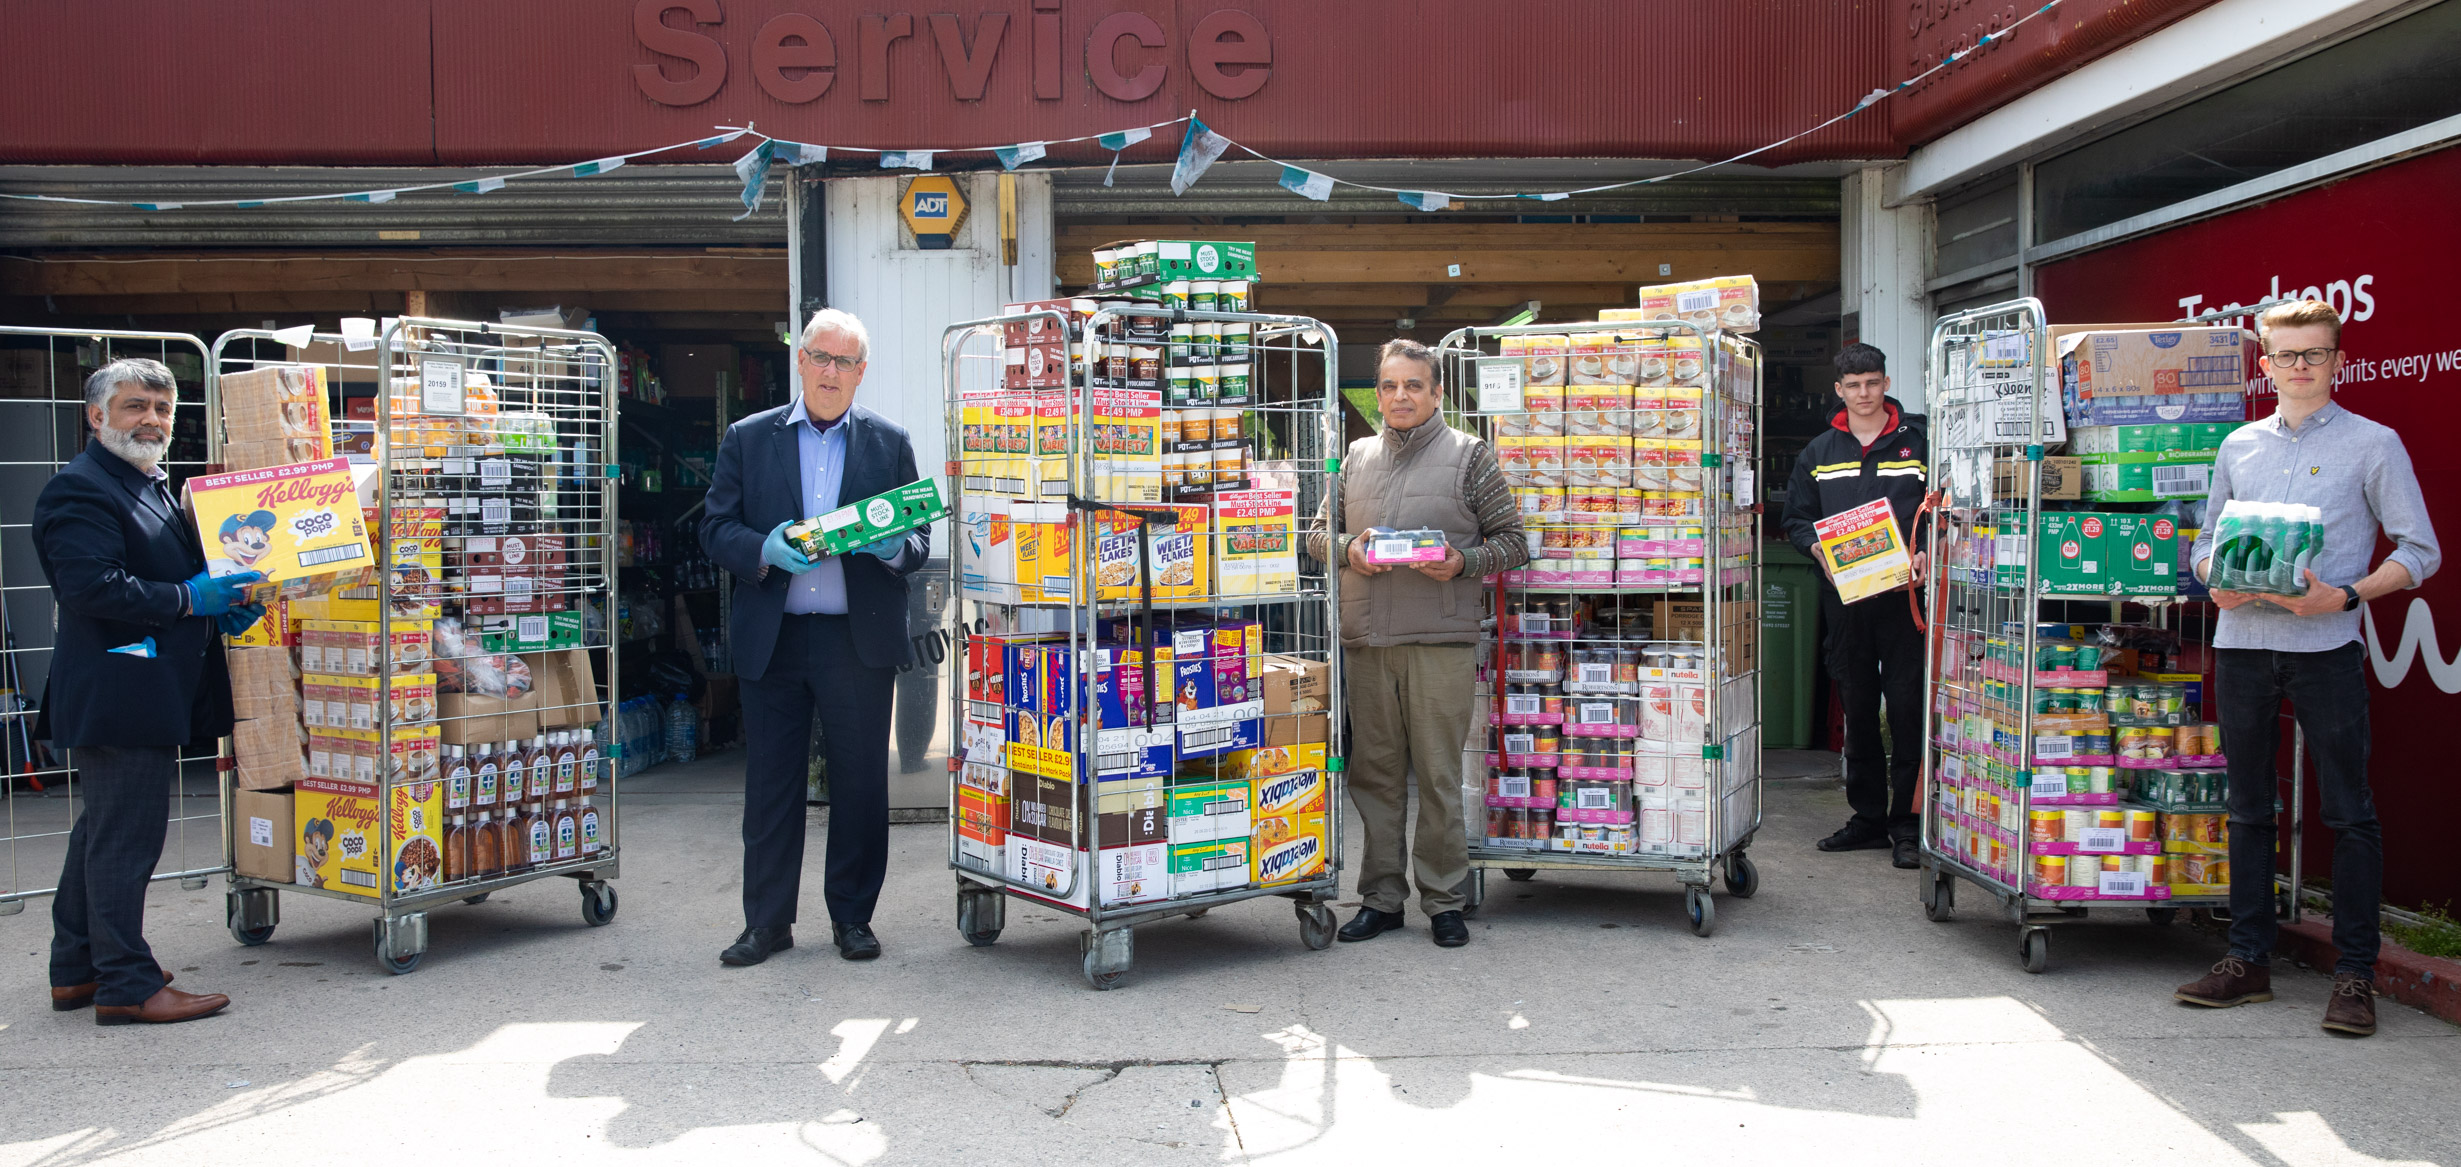 Kind-hearted Muslim community rallies to support foodbanks